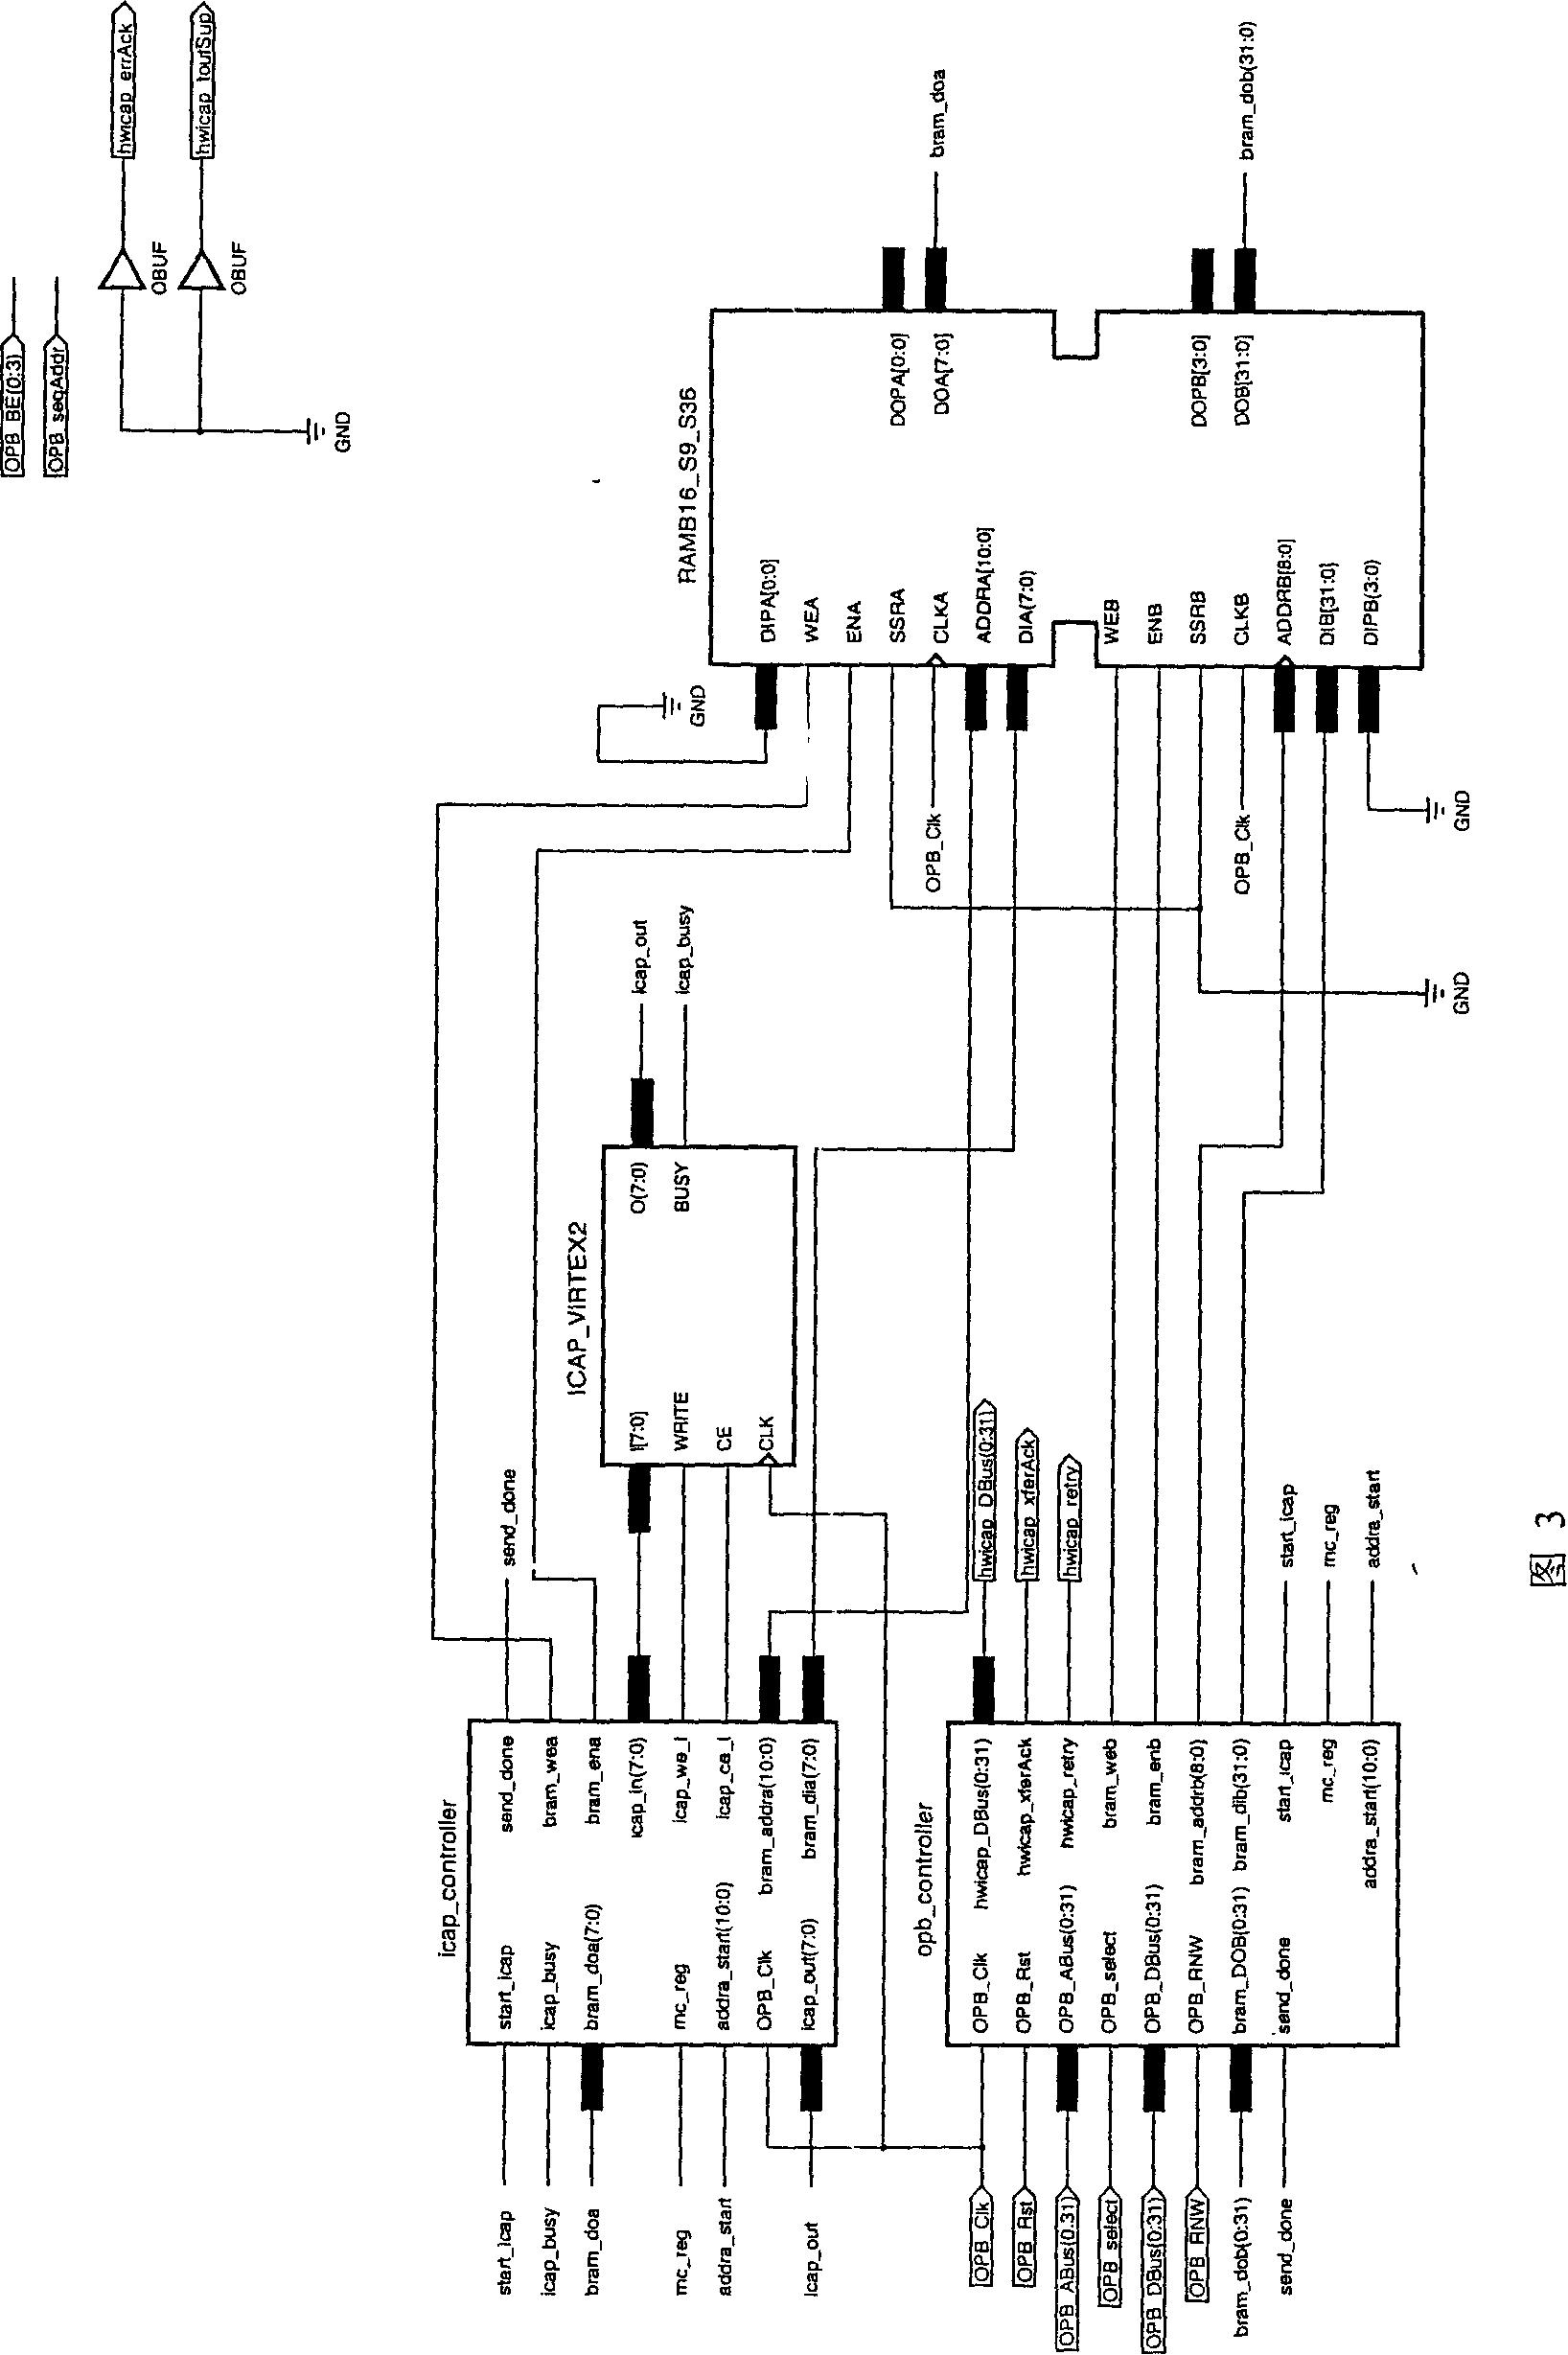 Self-reconfigurable on-chip multimedia processing system and its self-reconfiguration realization method